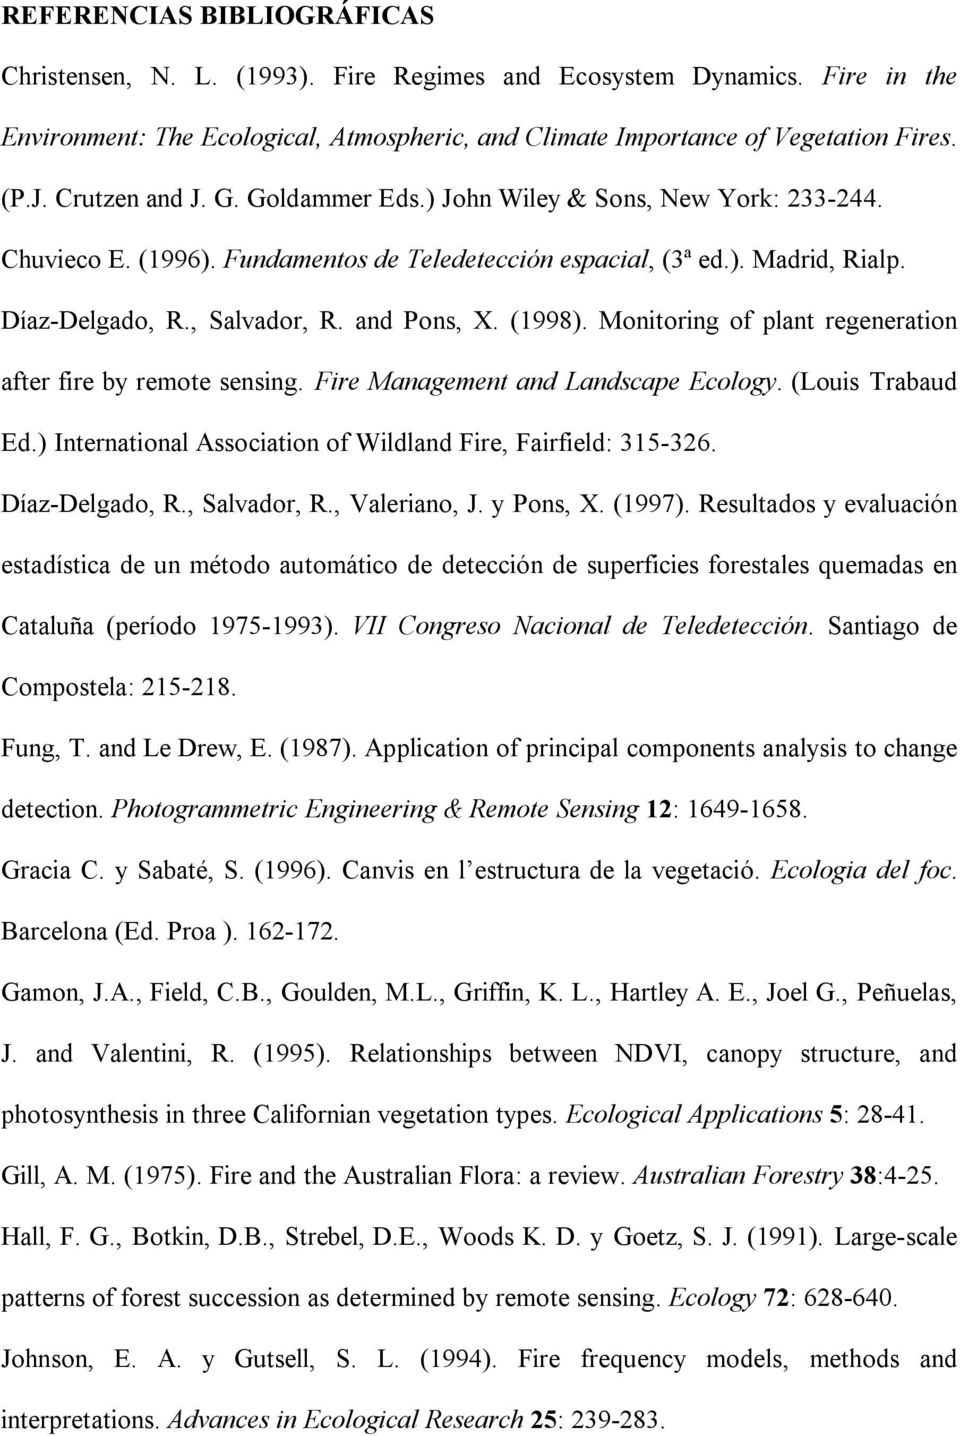 (1998). Monitoring of plant regeneration after fire by remote sensing. Fire Management and Landscape Ecology. (Louis Trabaud Ed.) International Association of Wildland Fire, Fairfield: 315-326.